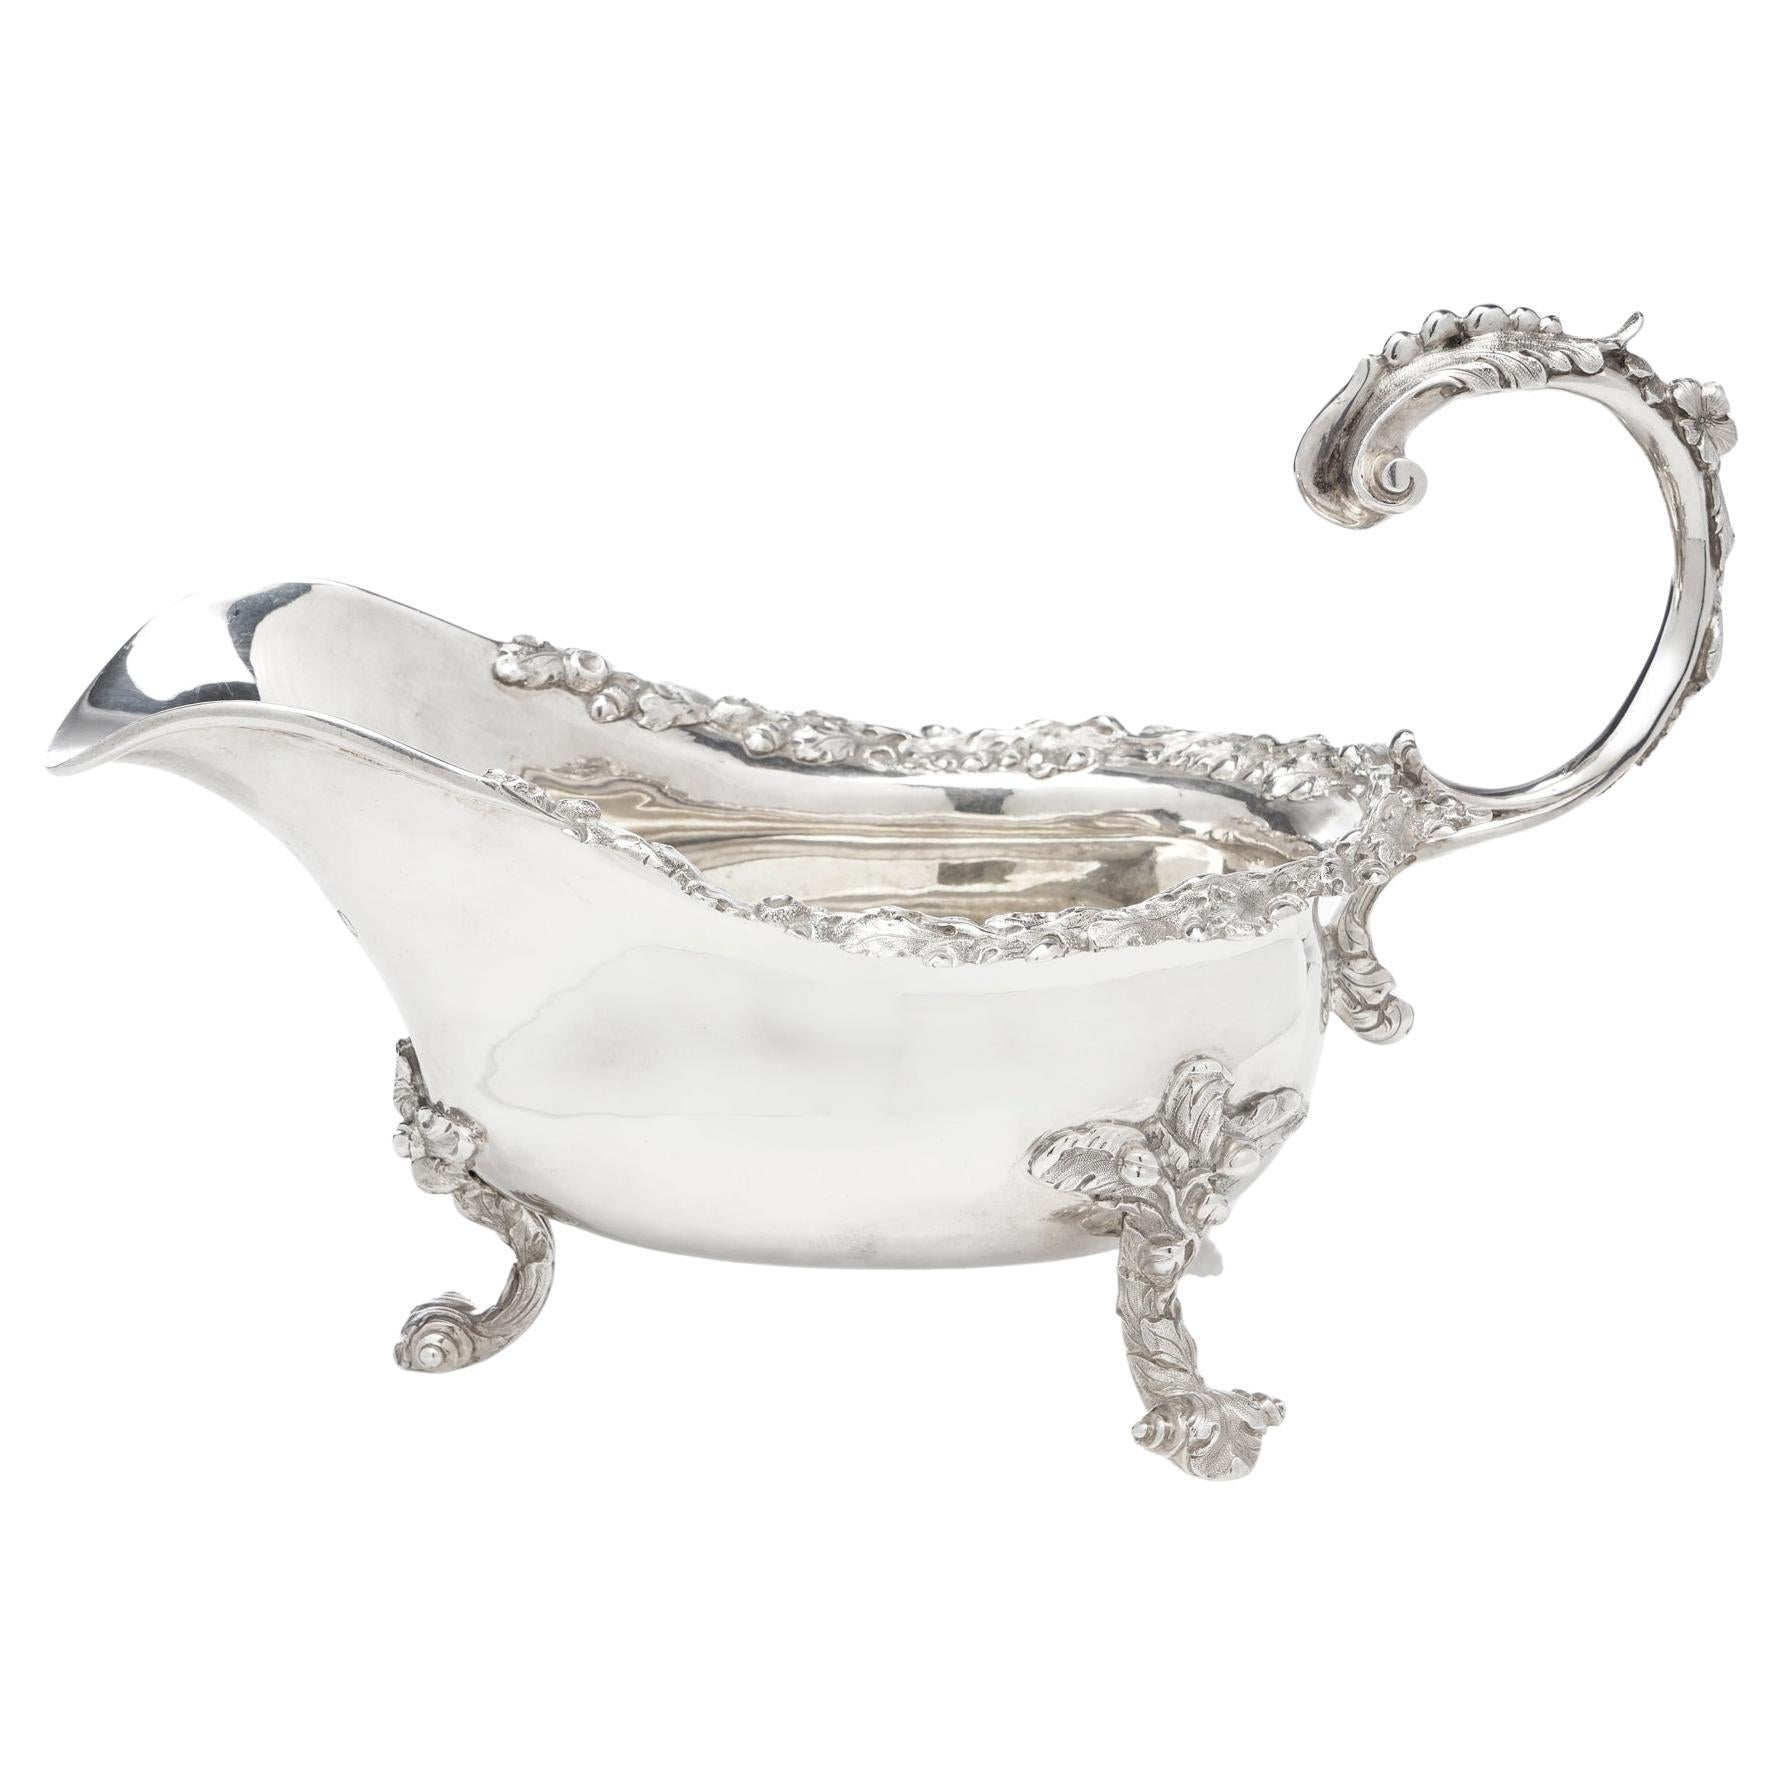 Georgian Sterling Silver Chased Sauce Boat, James Arthur, London, 1827 For Sale